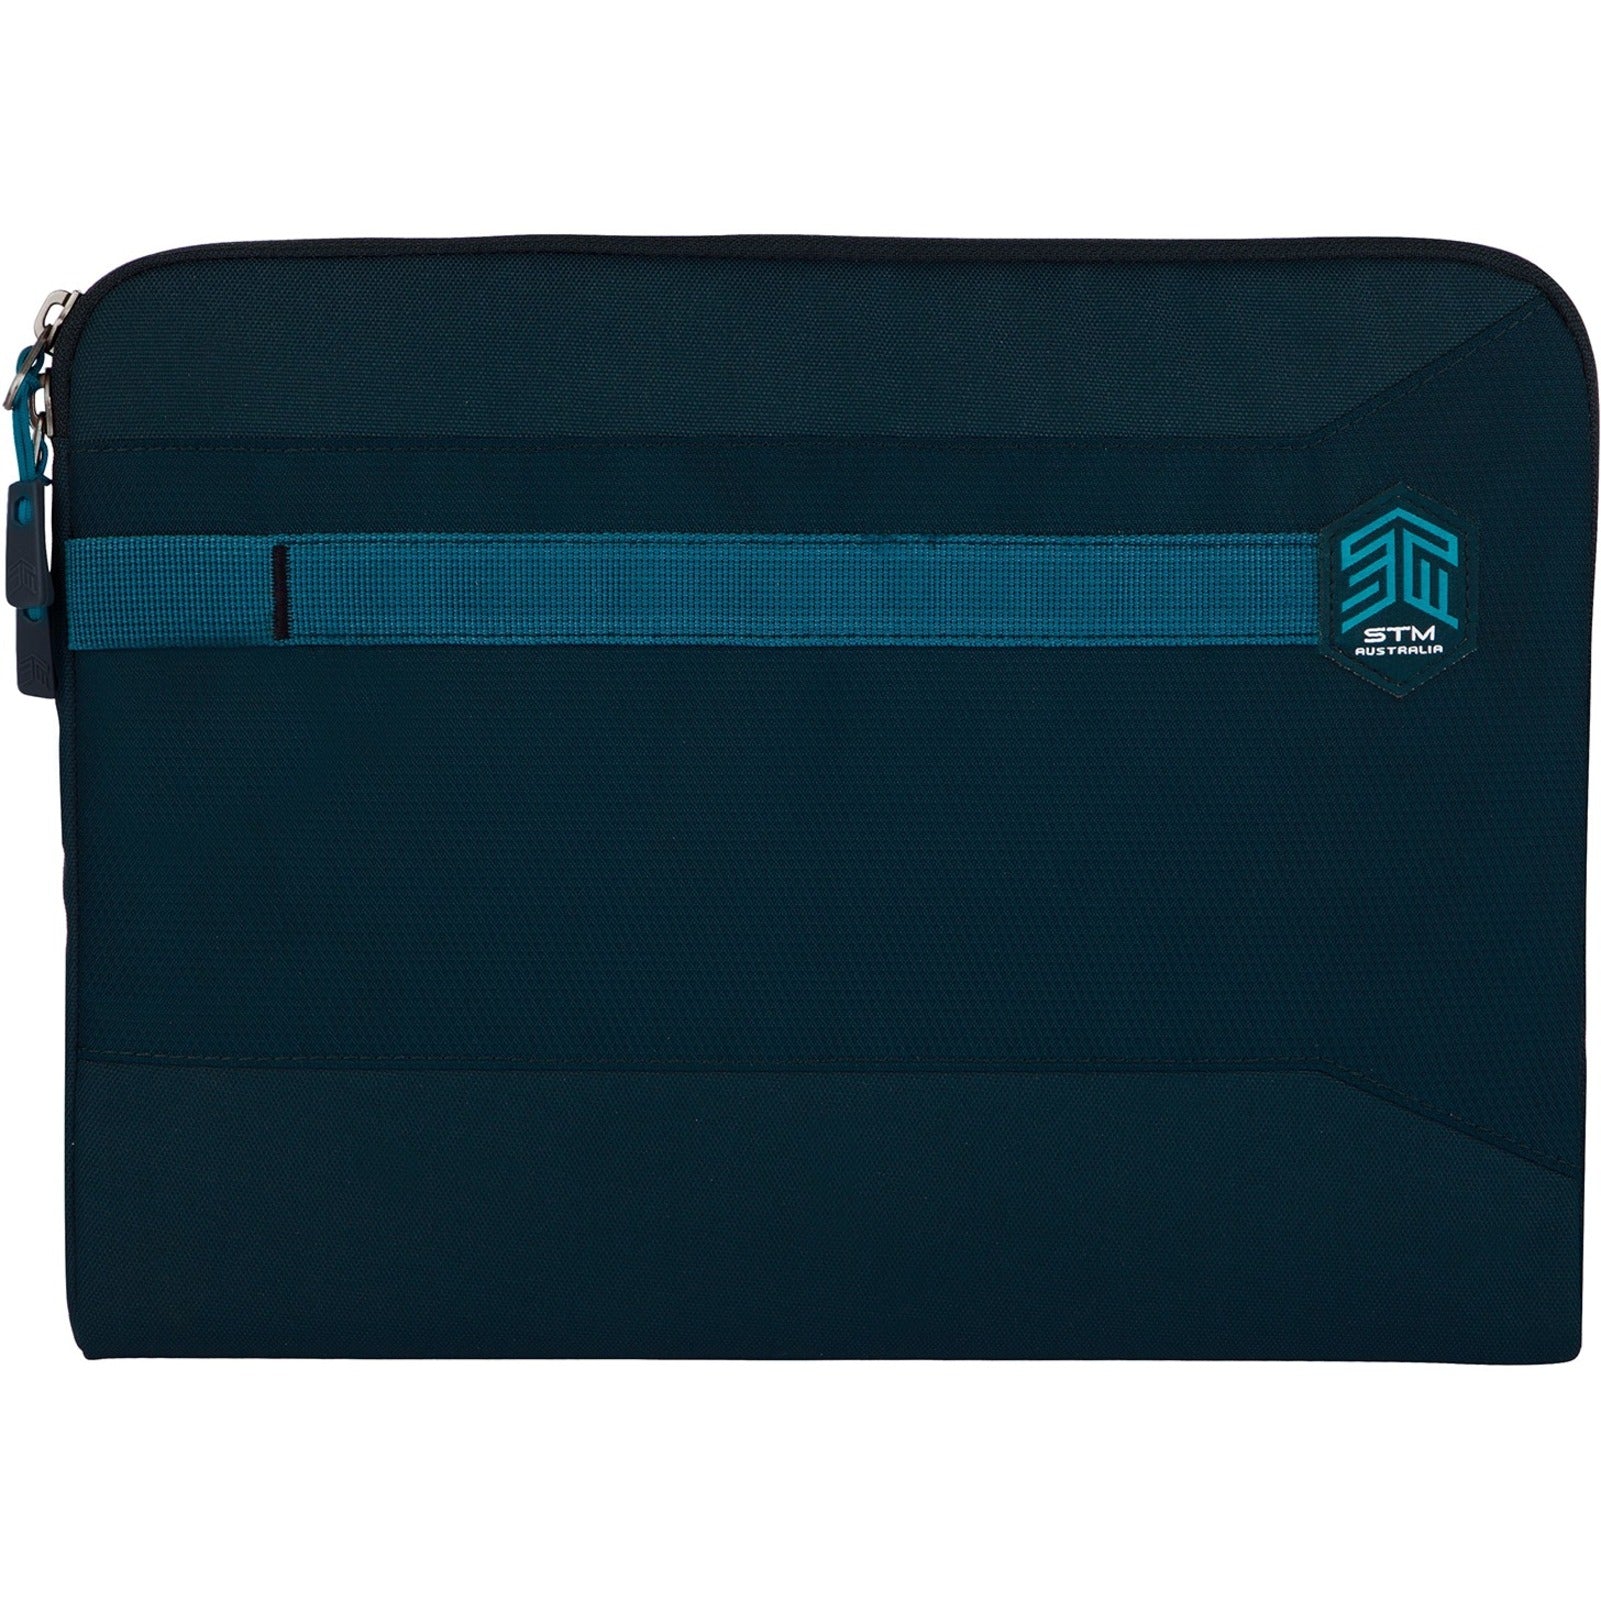 STM Goods STM-114-168P-04 Summary Laptop Sleeve, Durable Zipper Pull, Slim and Light Protective Design, Easy Access to Laptop